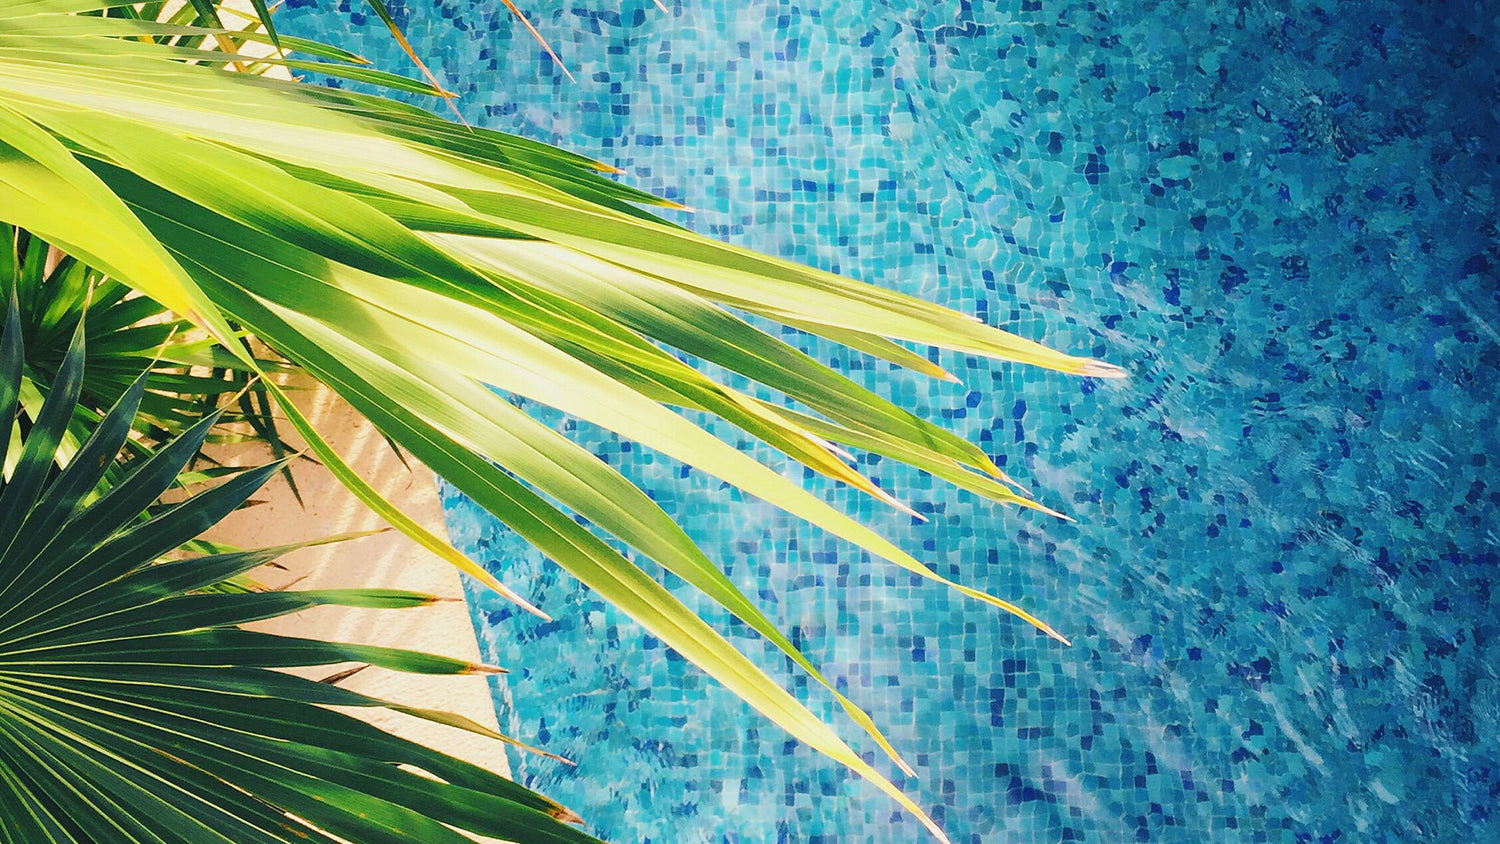 Swimming pool birds eye view, tiled pool. Bright blue water and bright green palm tree hanging over the pool.